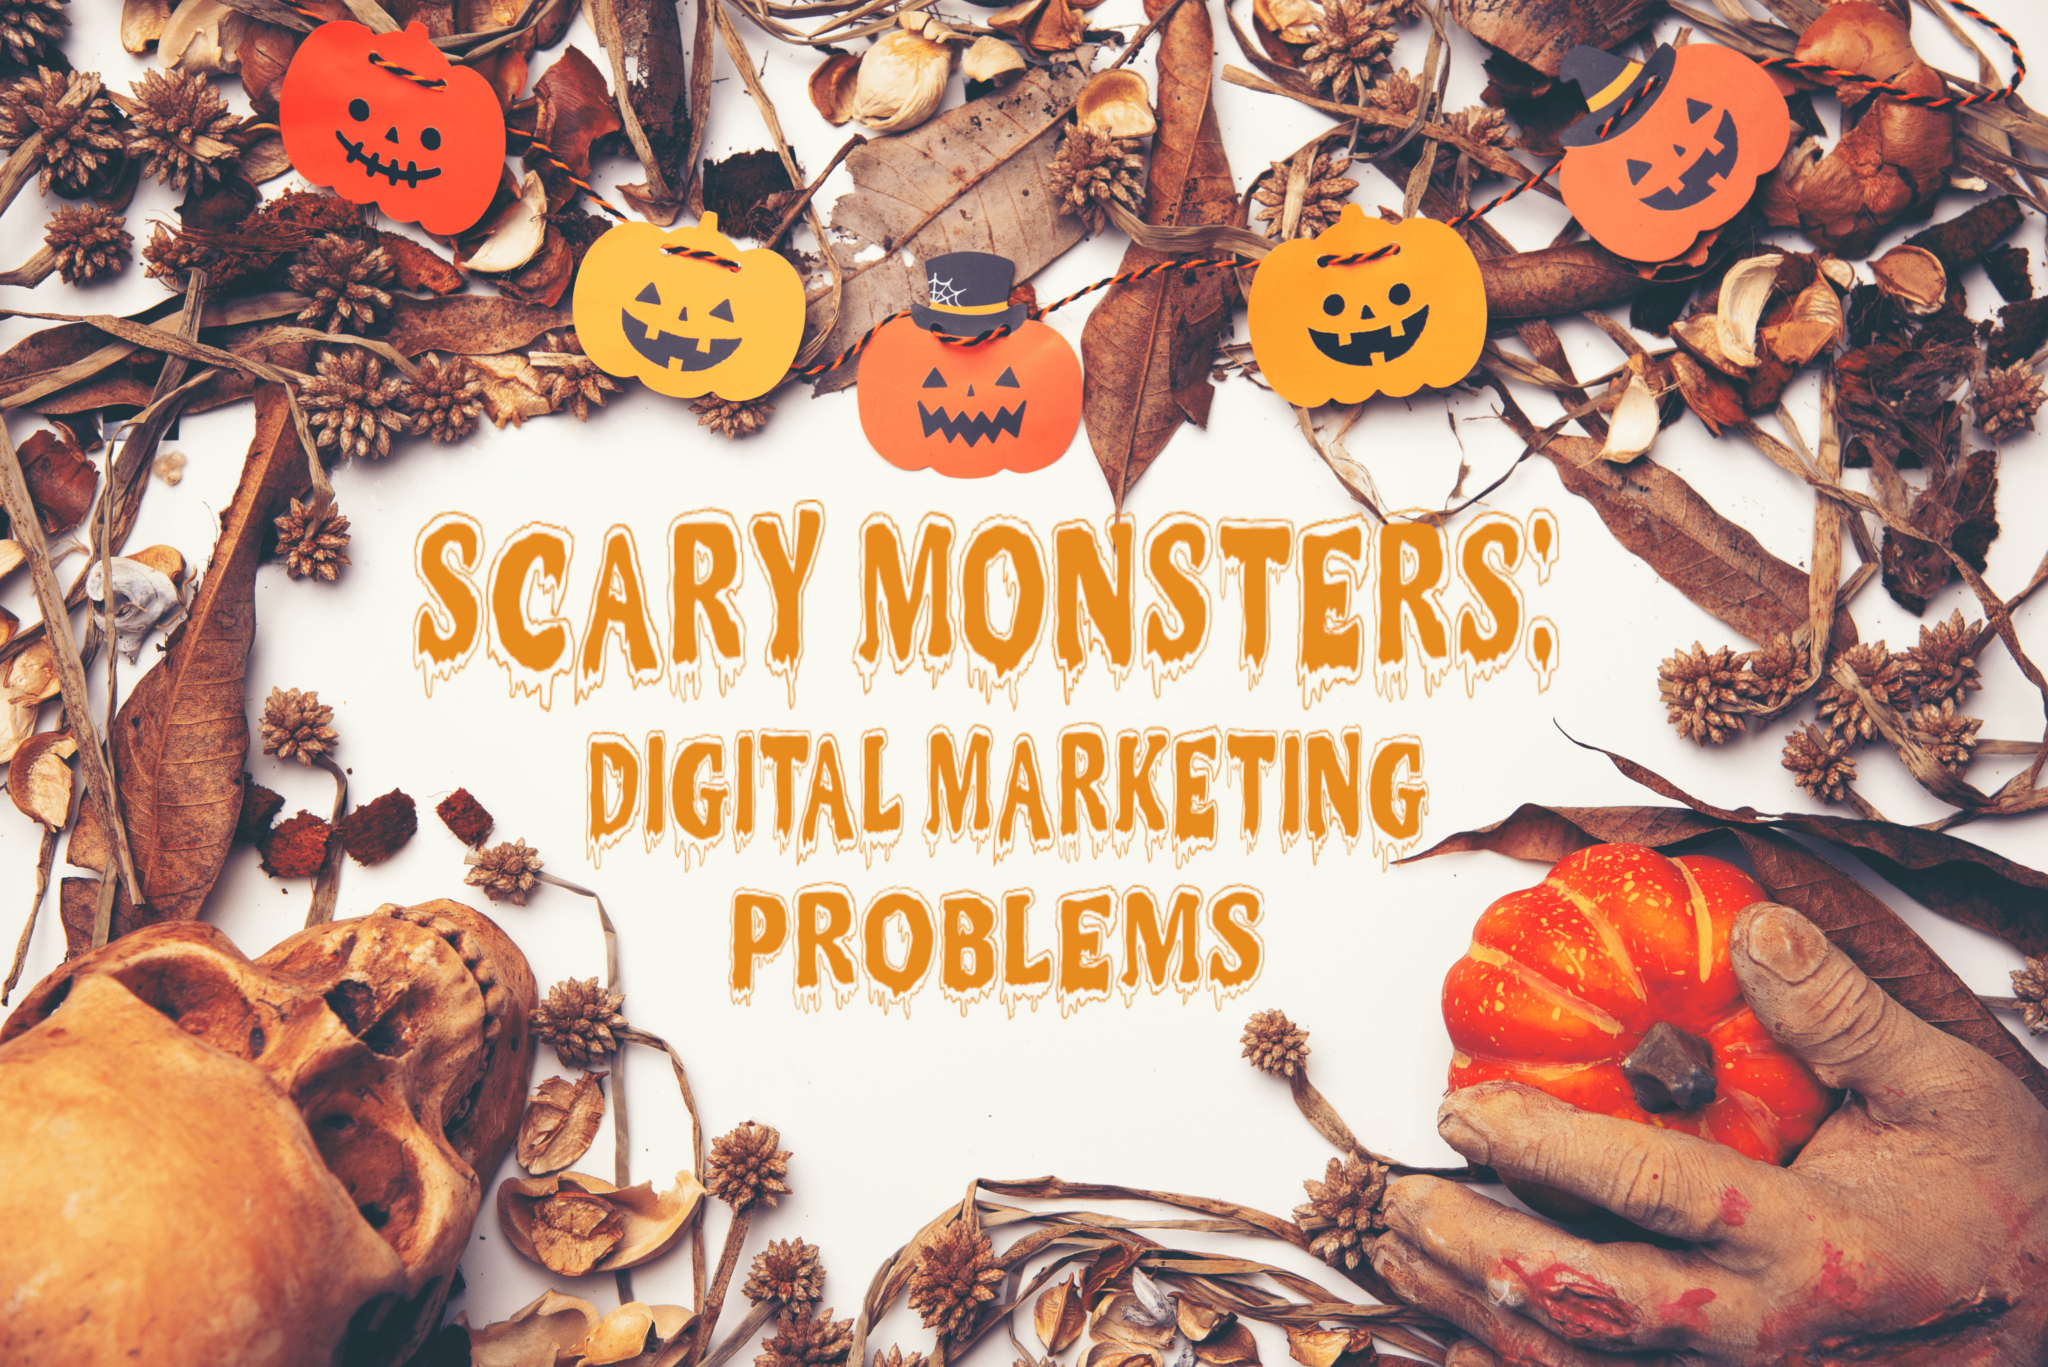 Scary Monsters Digital Marketing Problems